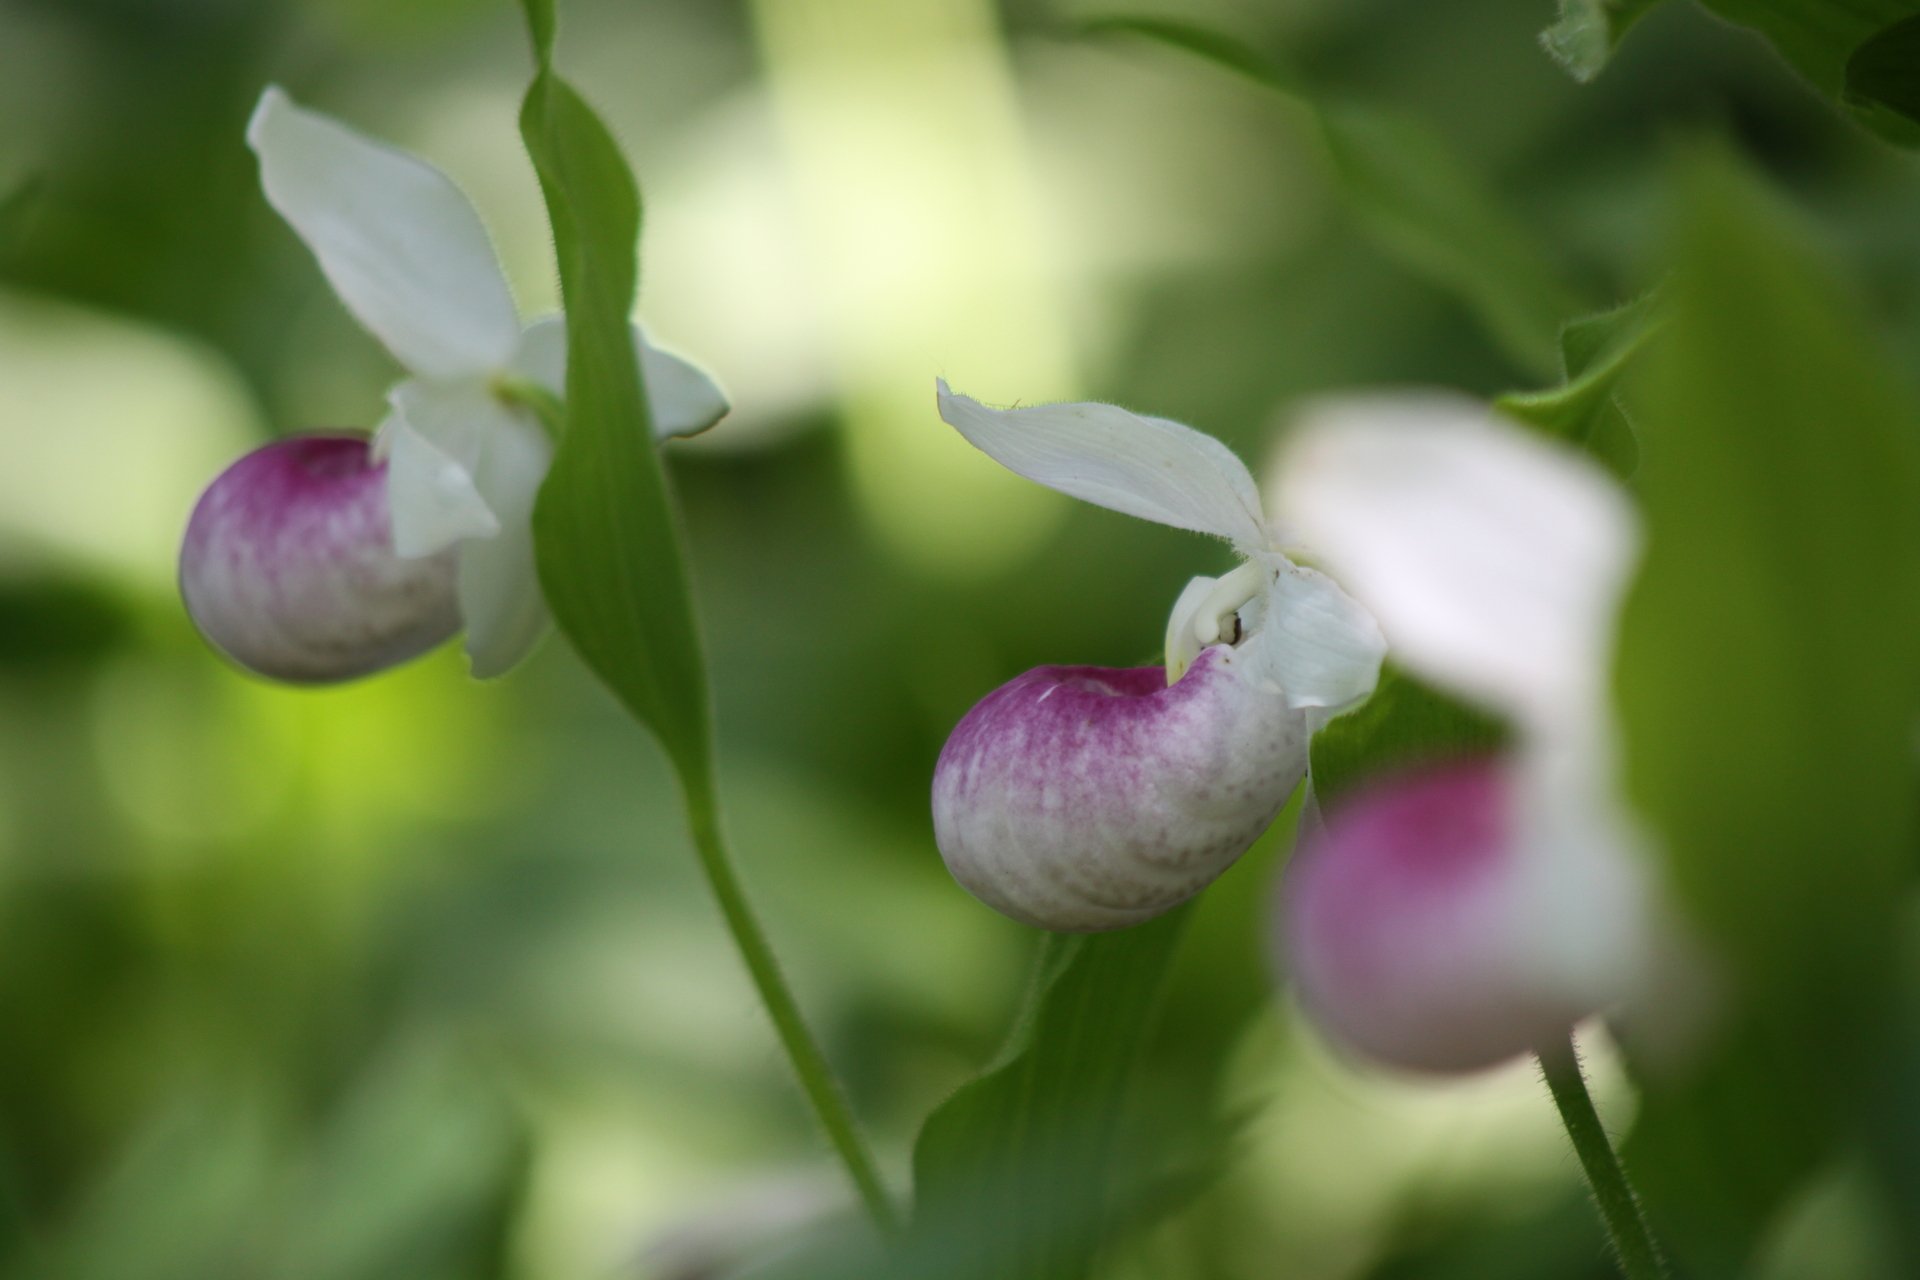 Three pink and white Lady's Slippers with green leaves.